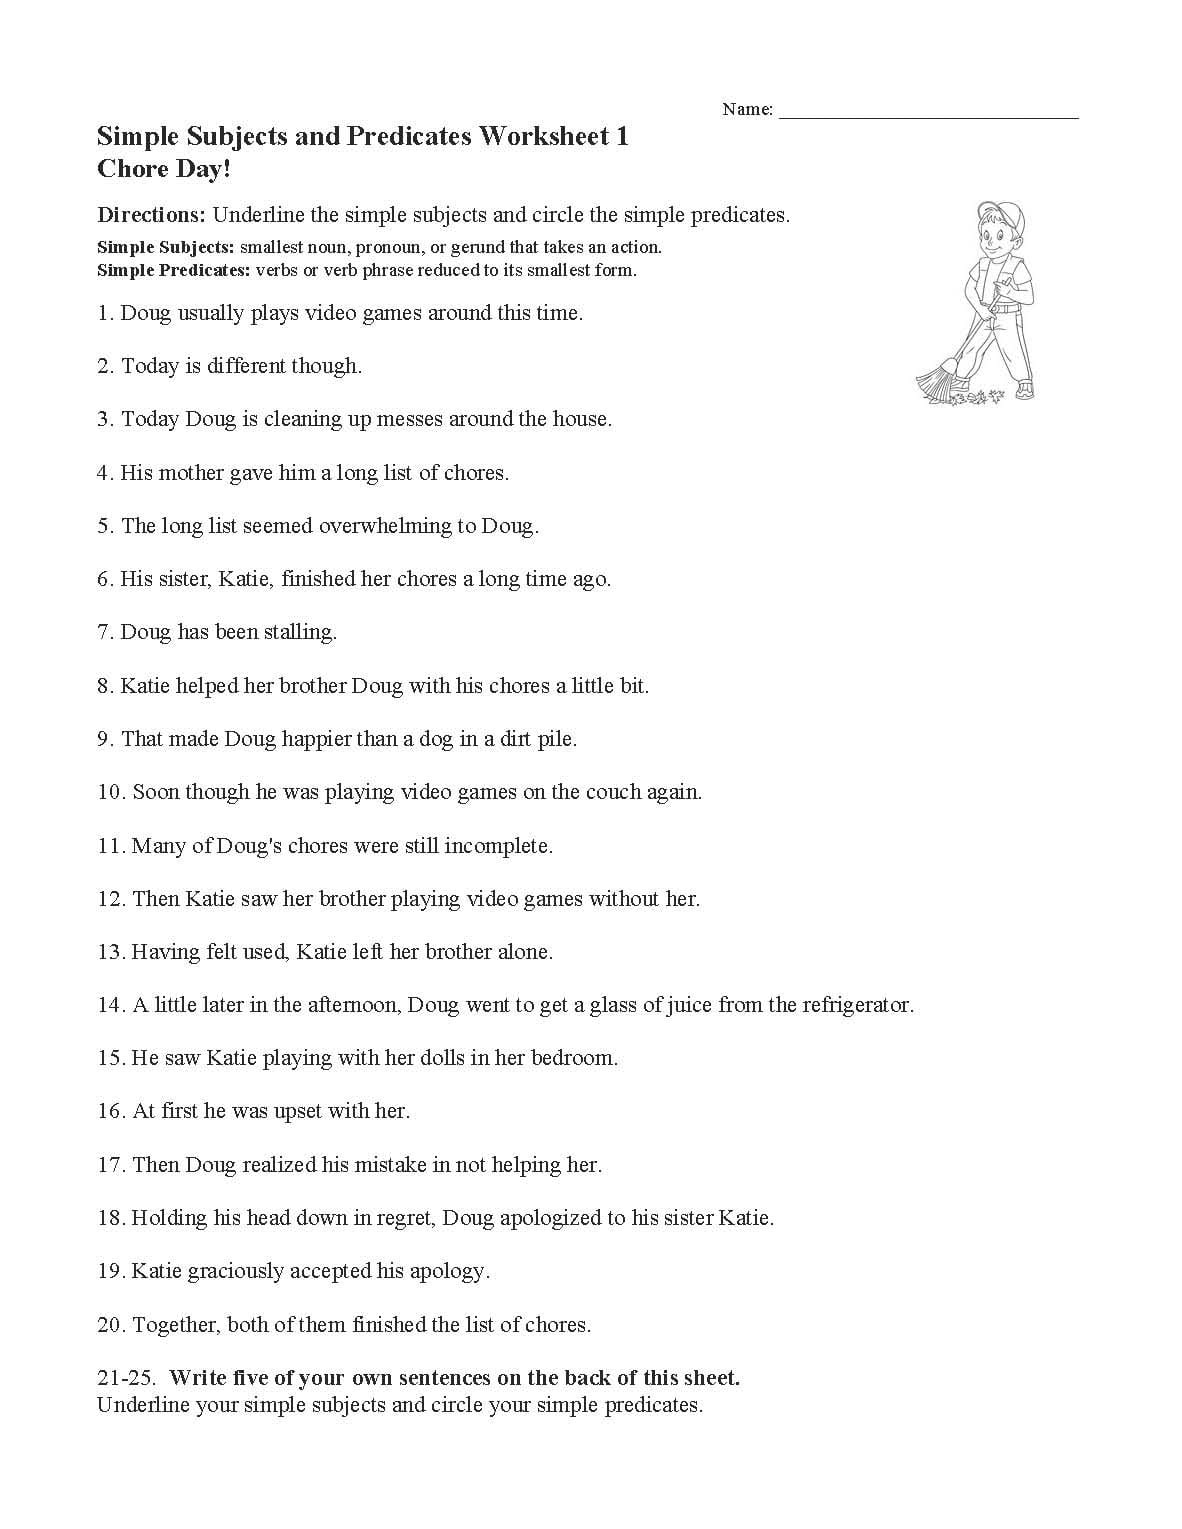 Simple Subjects And Predicates Worksheet 1  Preview As Well As Simple Subject And Predicate Worksheets